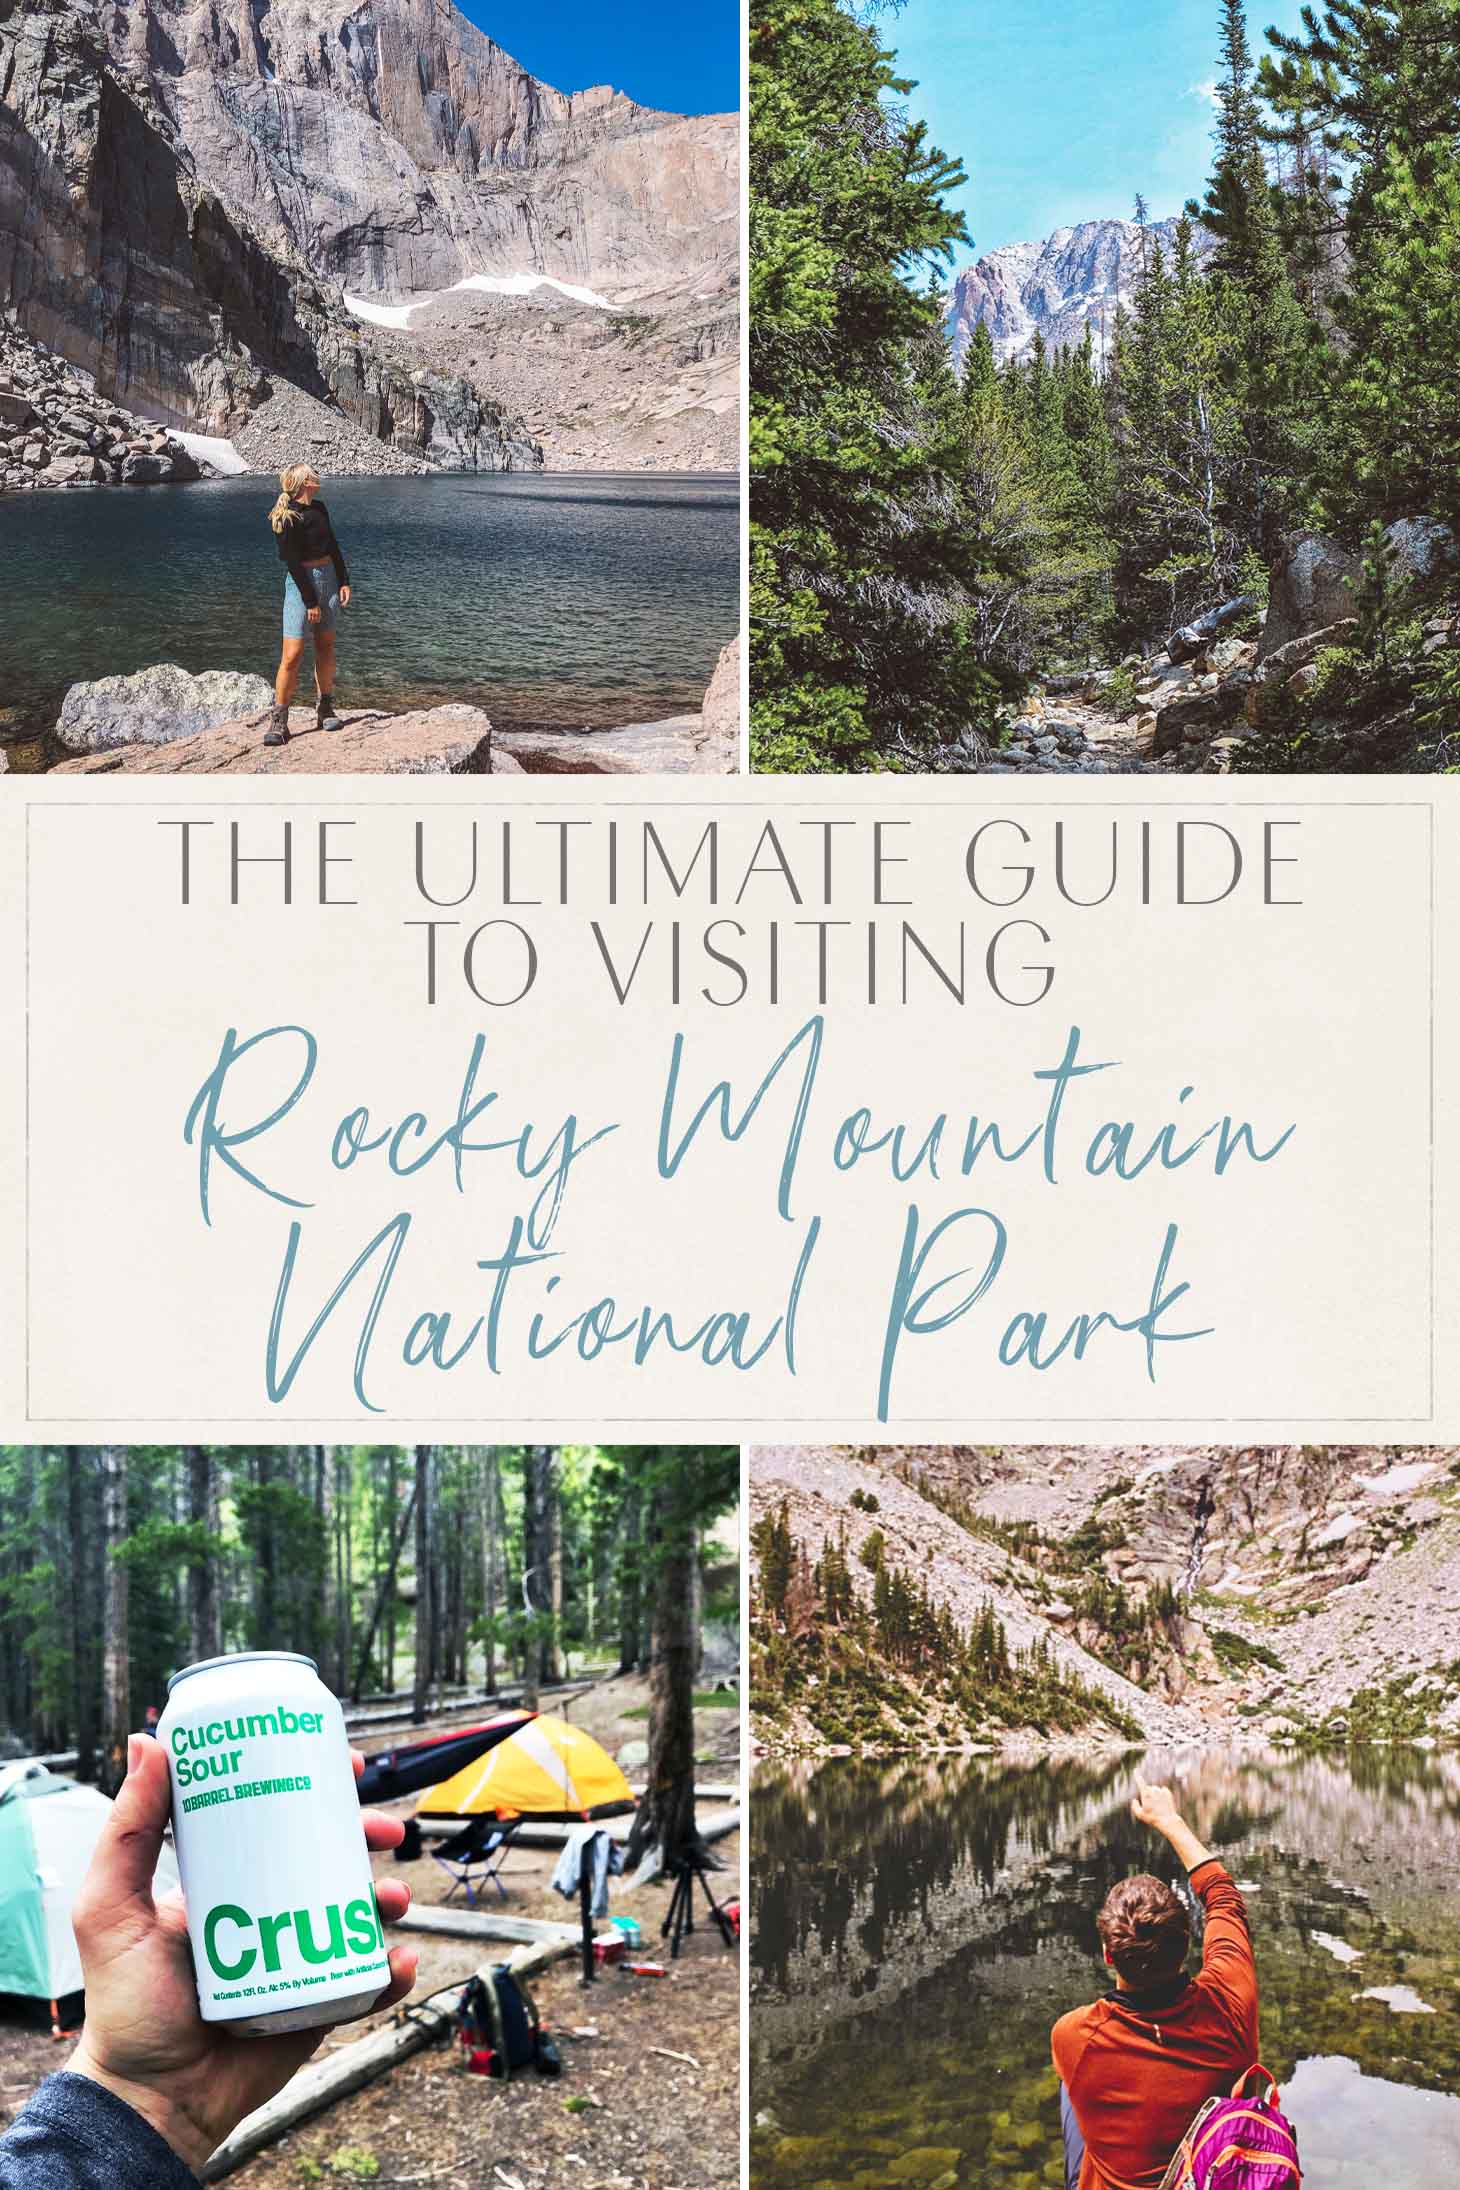 The Ultimate Guide to Visiting Rocky Mountain National Park